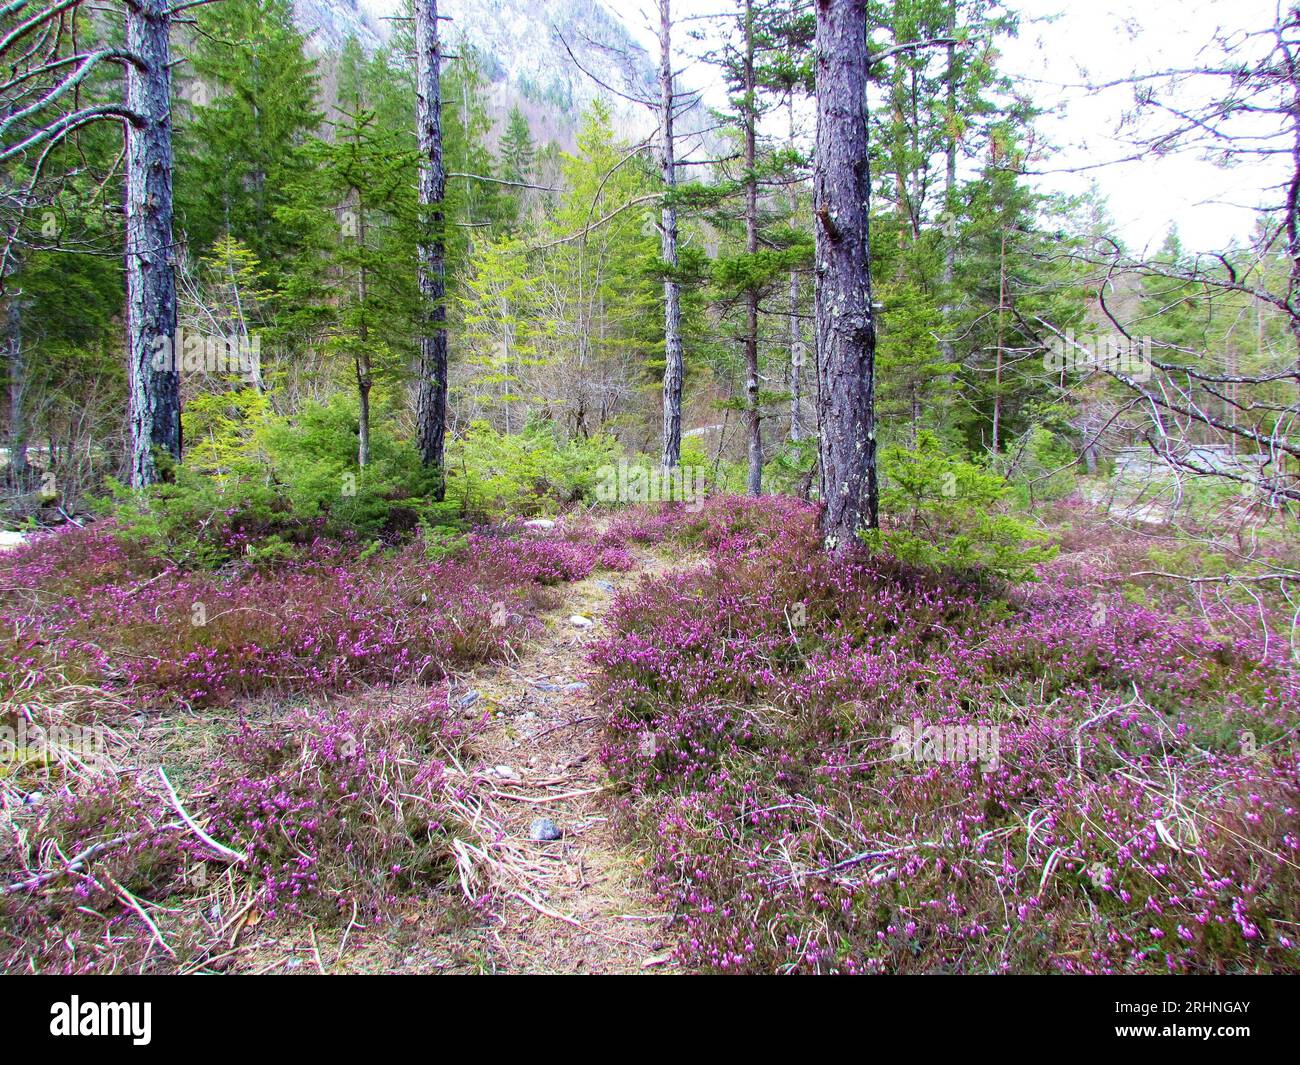 Pink winter heath flowers covering the ground in a european red pine (Pinus sylvestris) forest Stock Photo